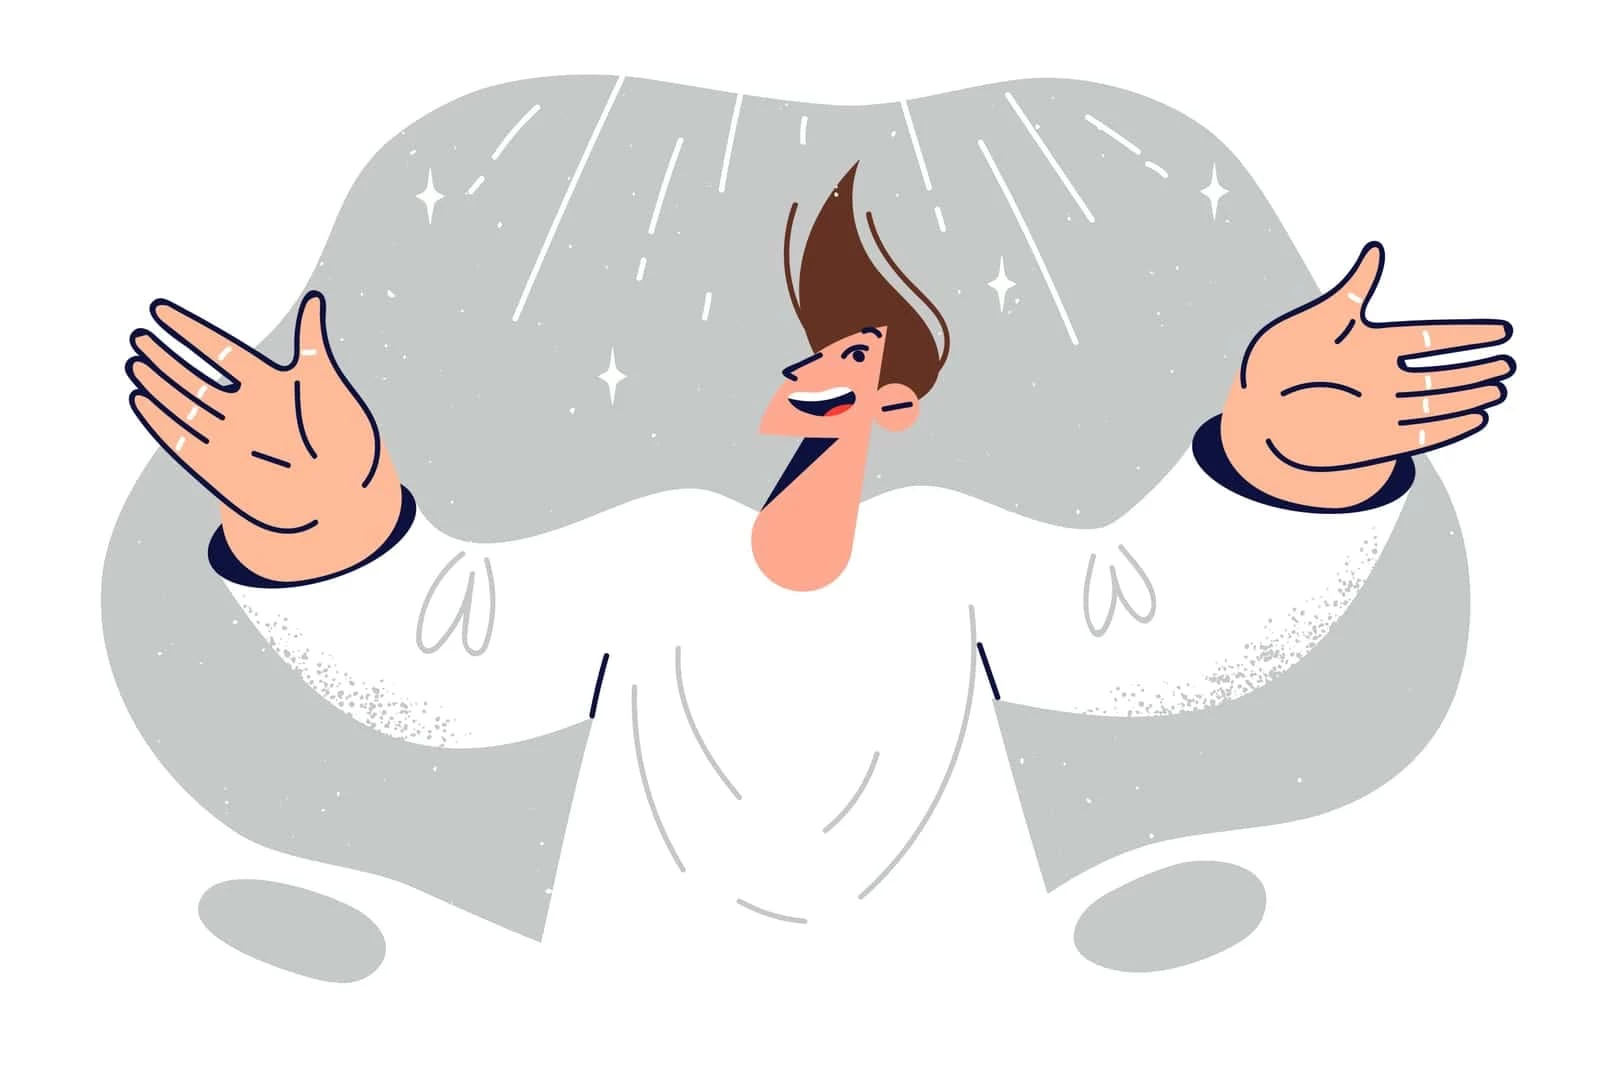 Illustration of a man in a white shirt gesturing excitedly with outstretched arms, smiling broadly, set against a grey background with sparkles.